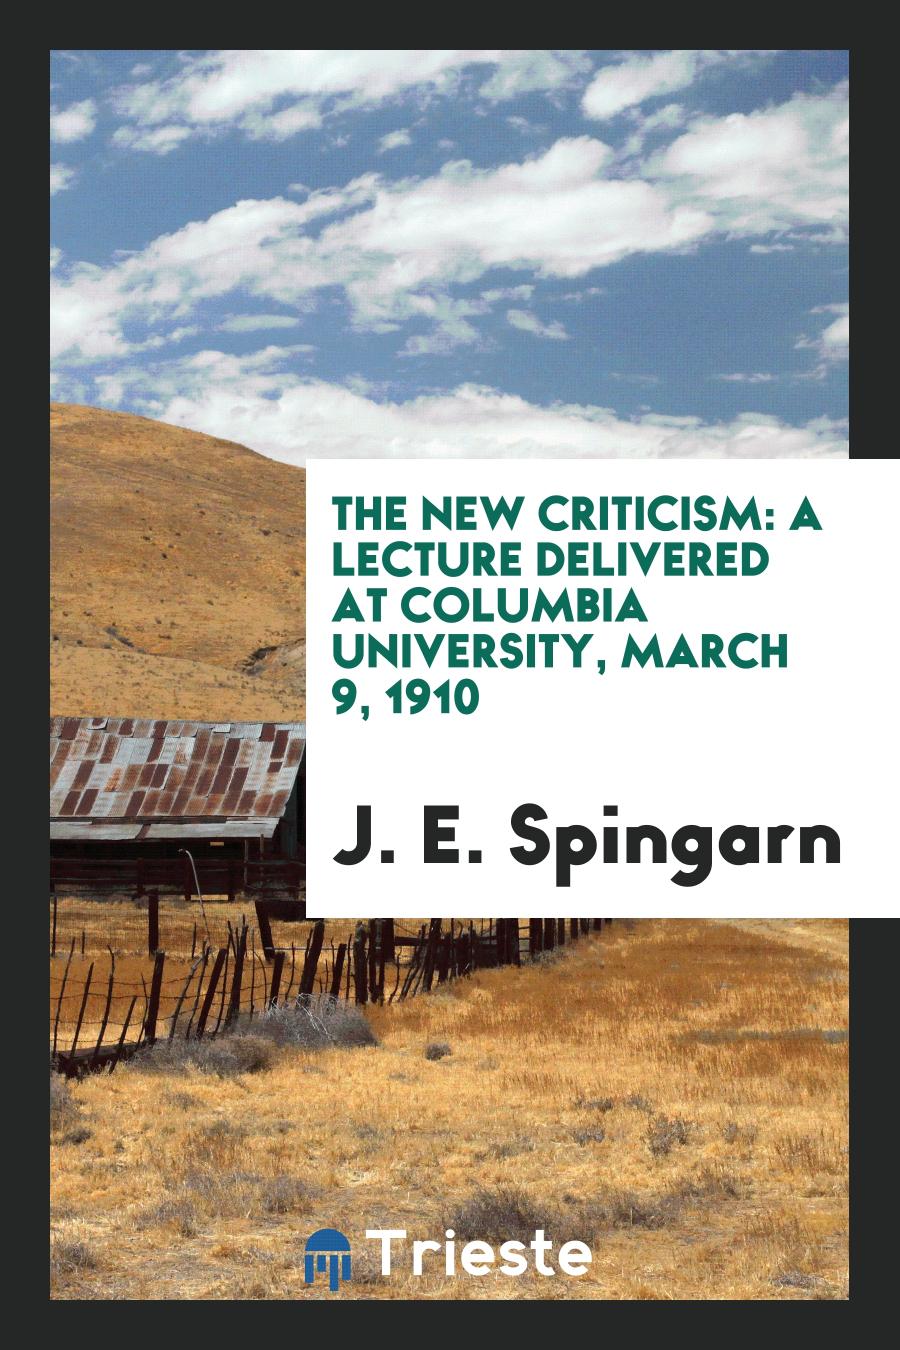 The New Criticism: A Lecture Delivered at Columbia University, March 9, 1910